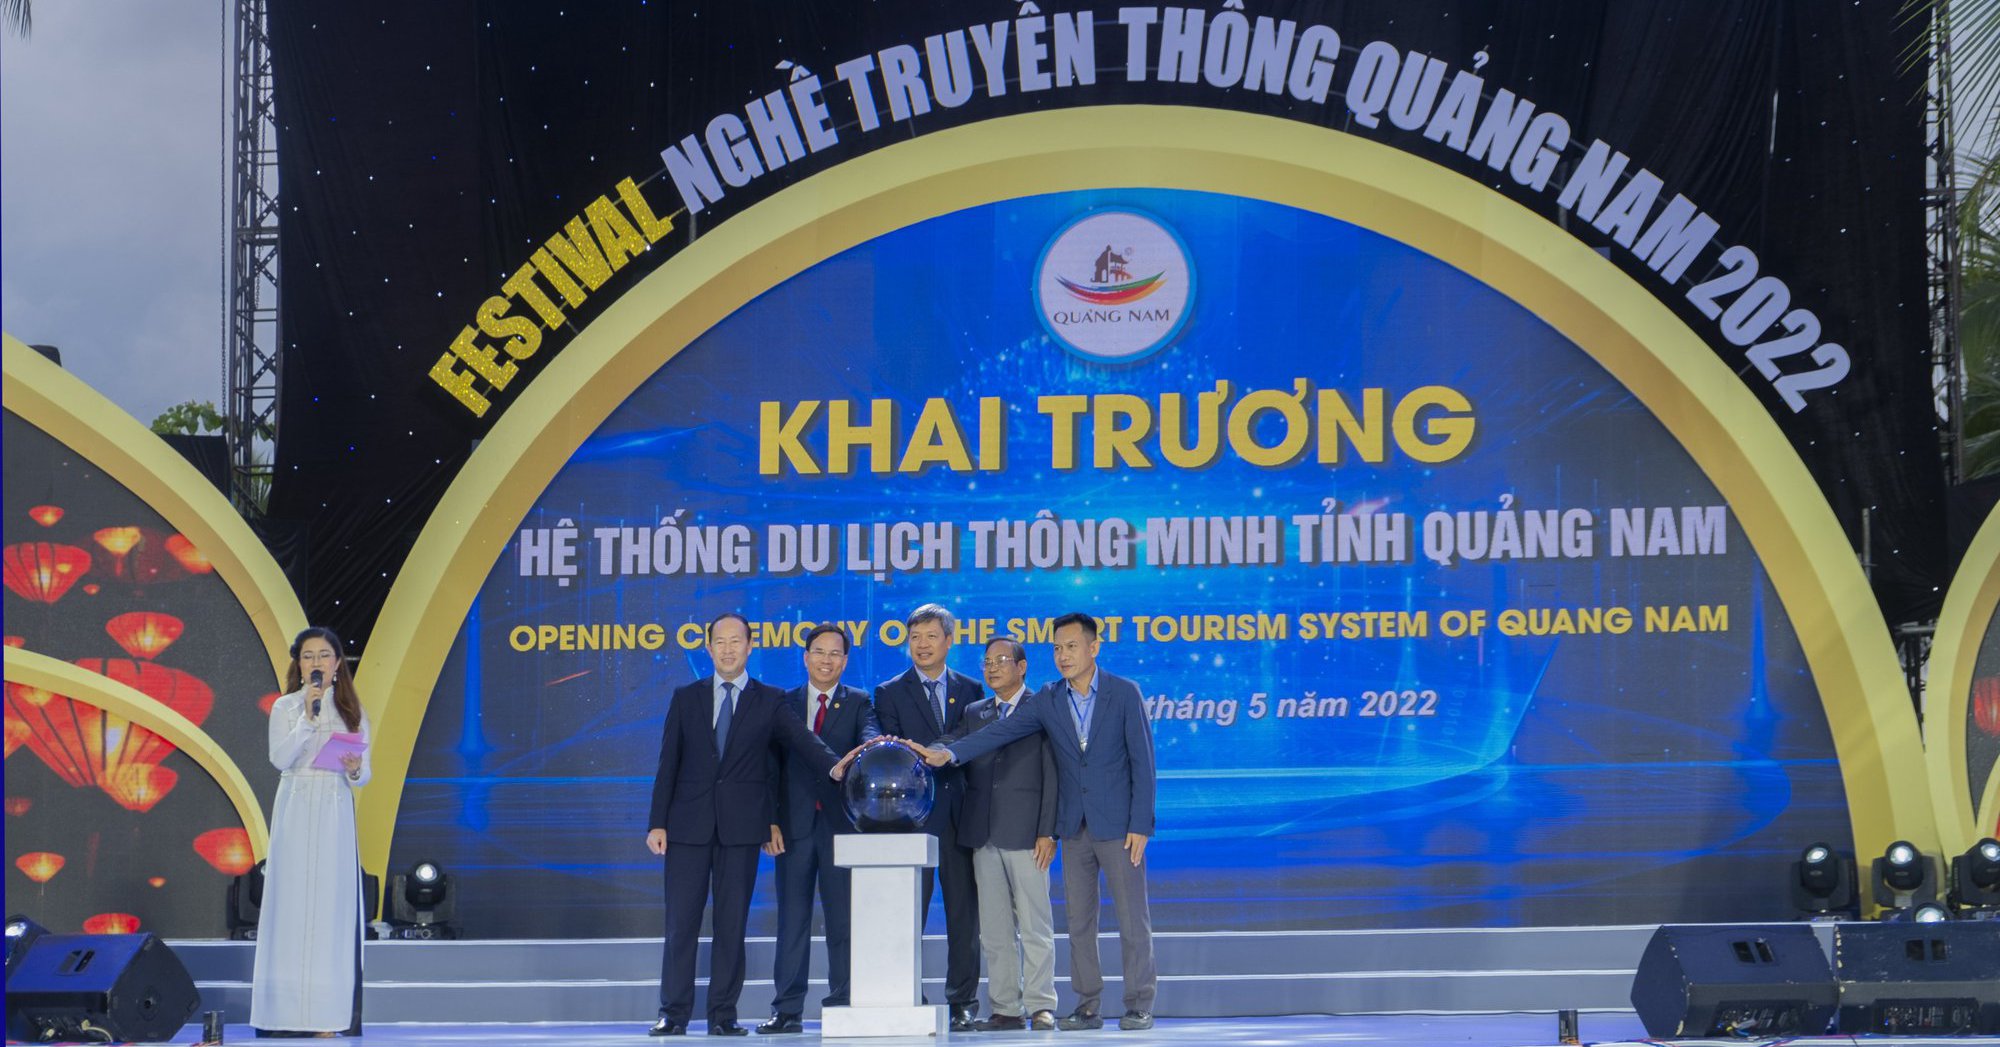 Quang Nam tourism raises the bar with smart technology applications